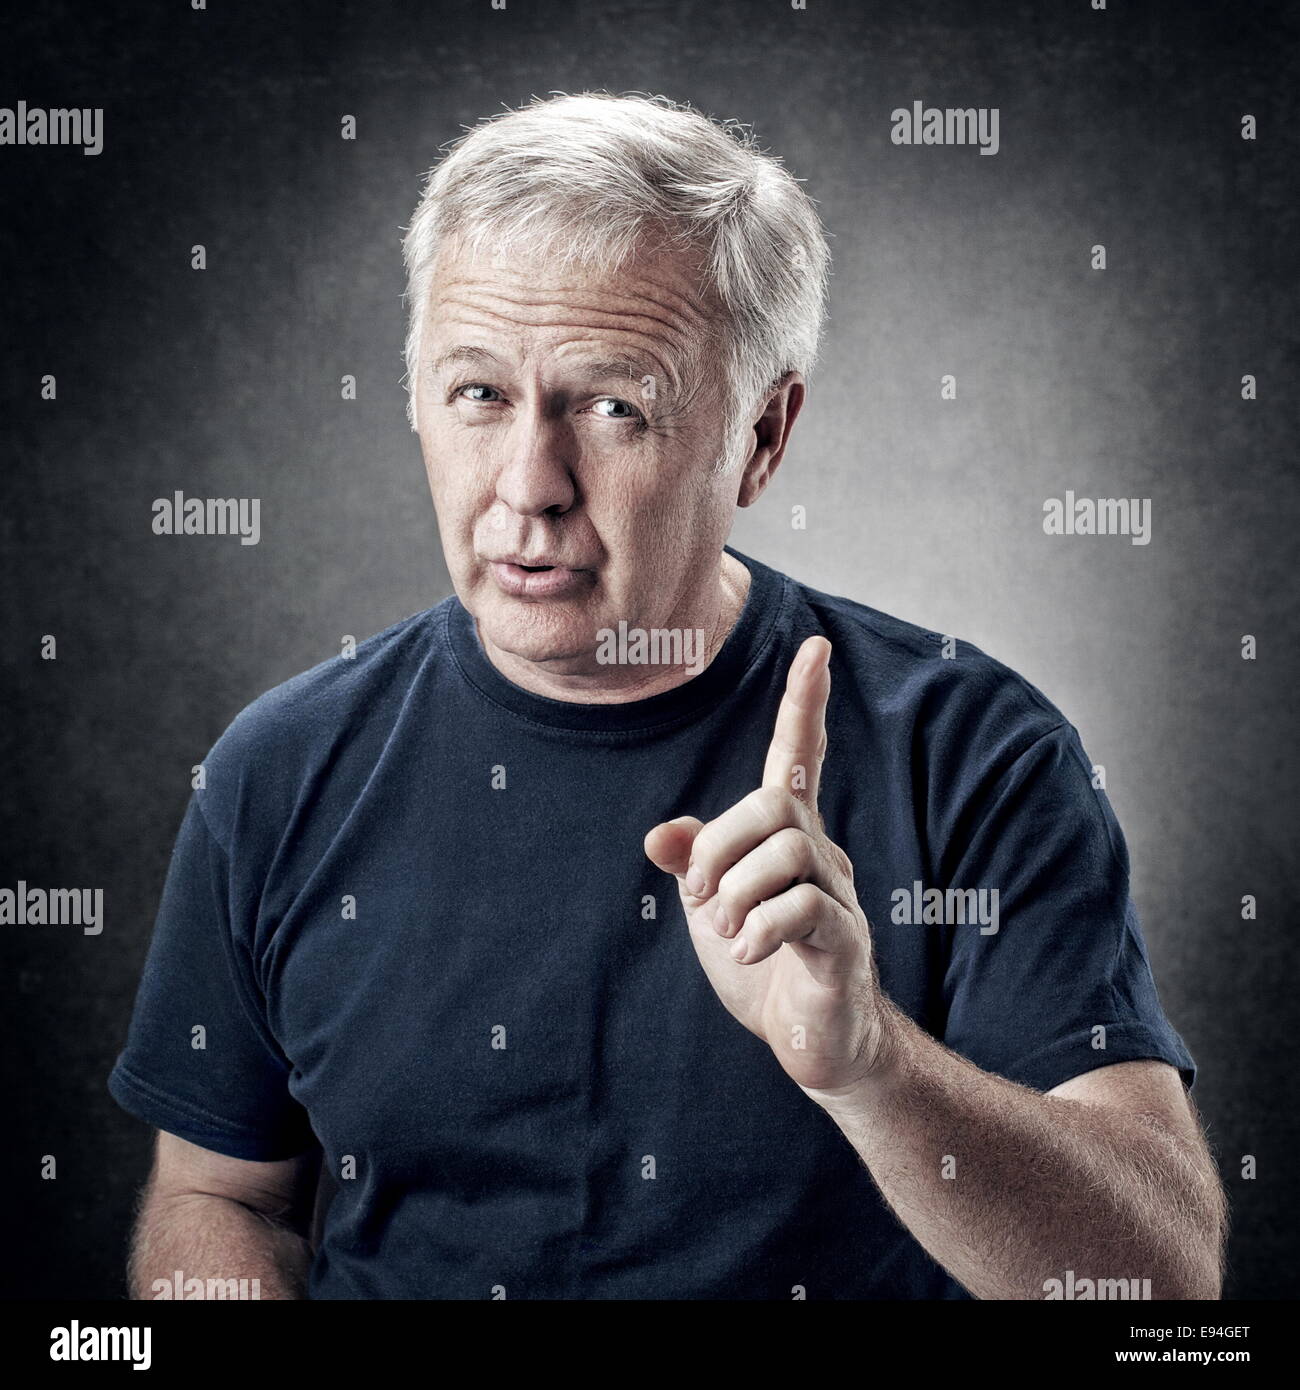 Old man emphasizing an idea for someone Stock Photo